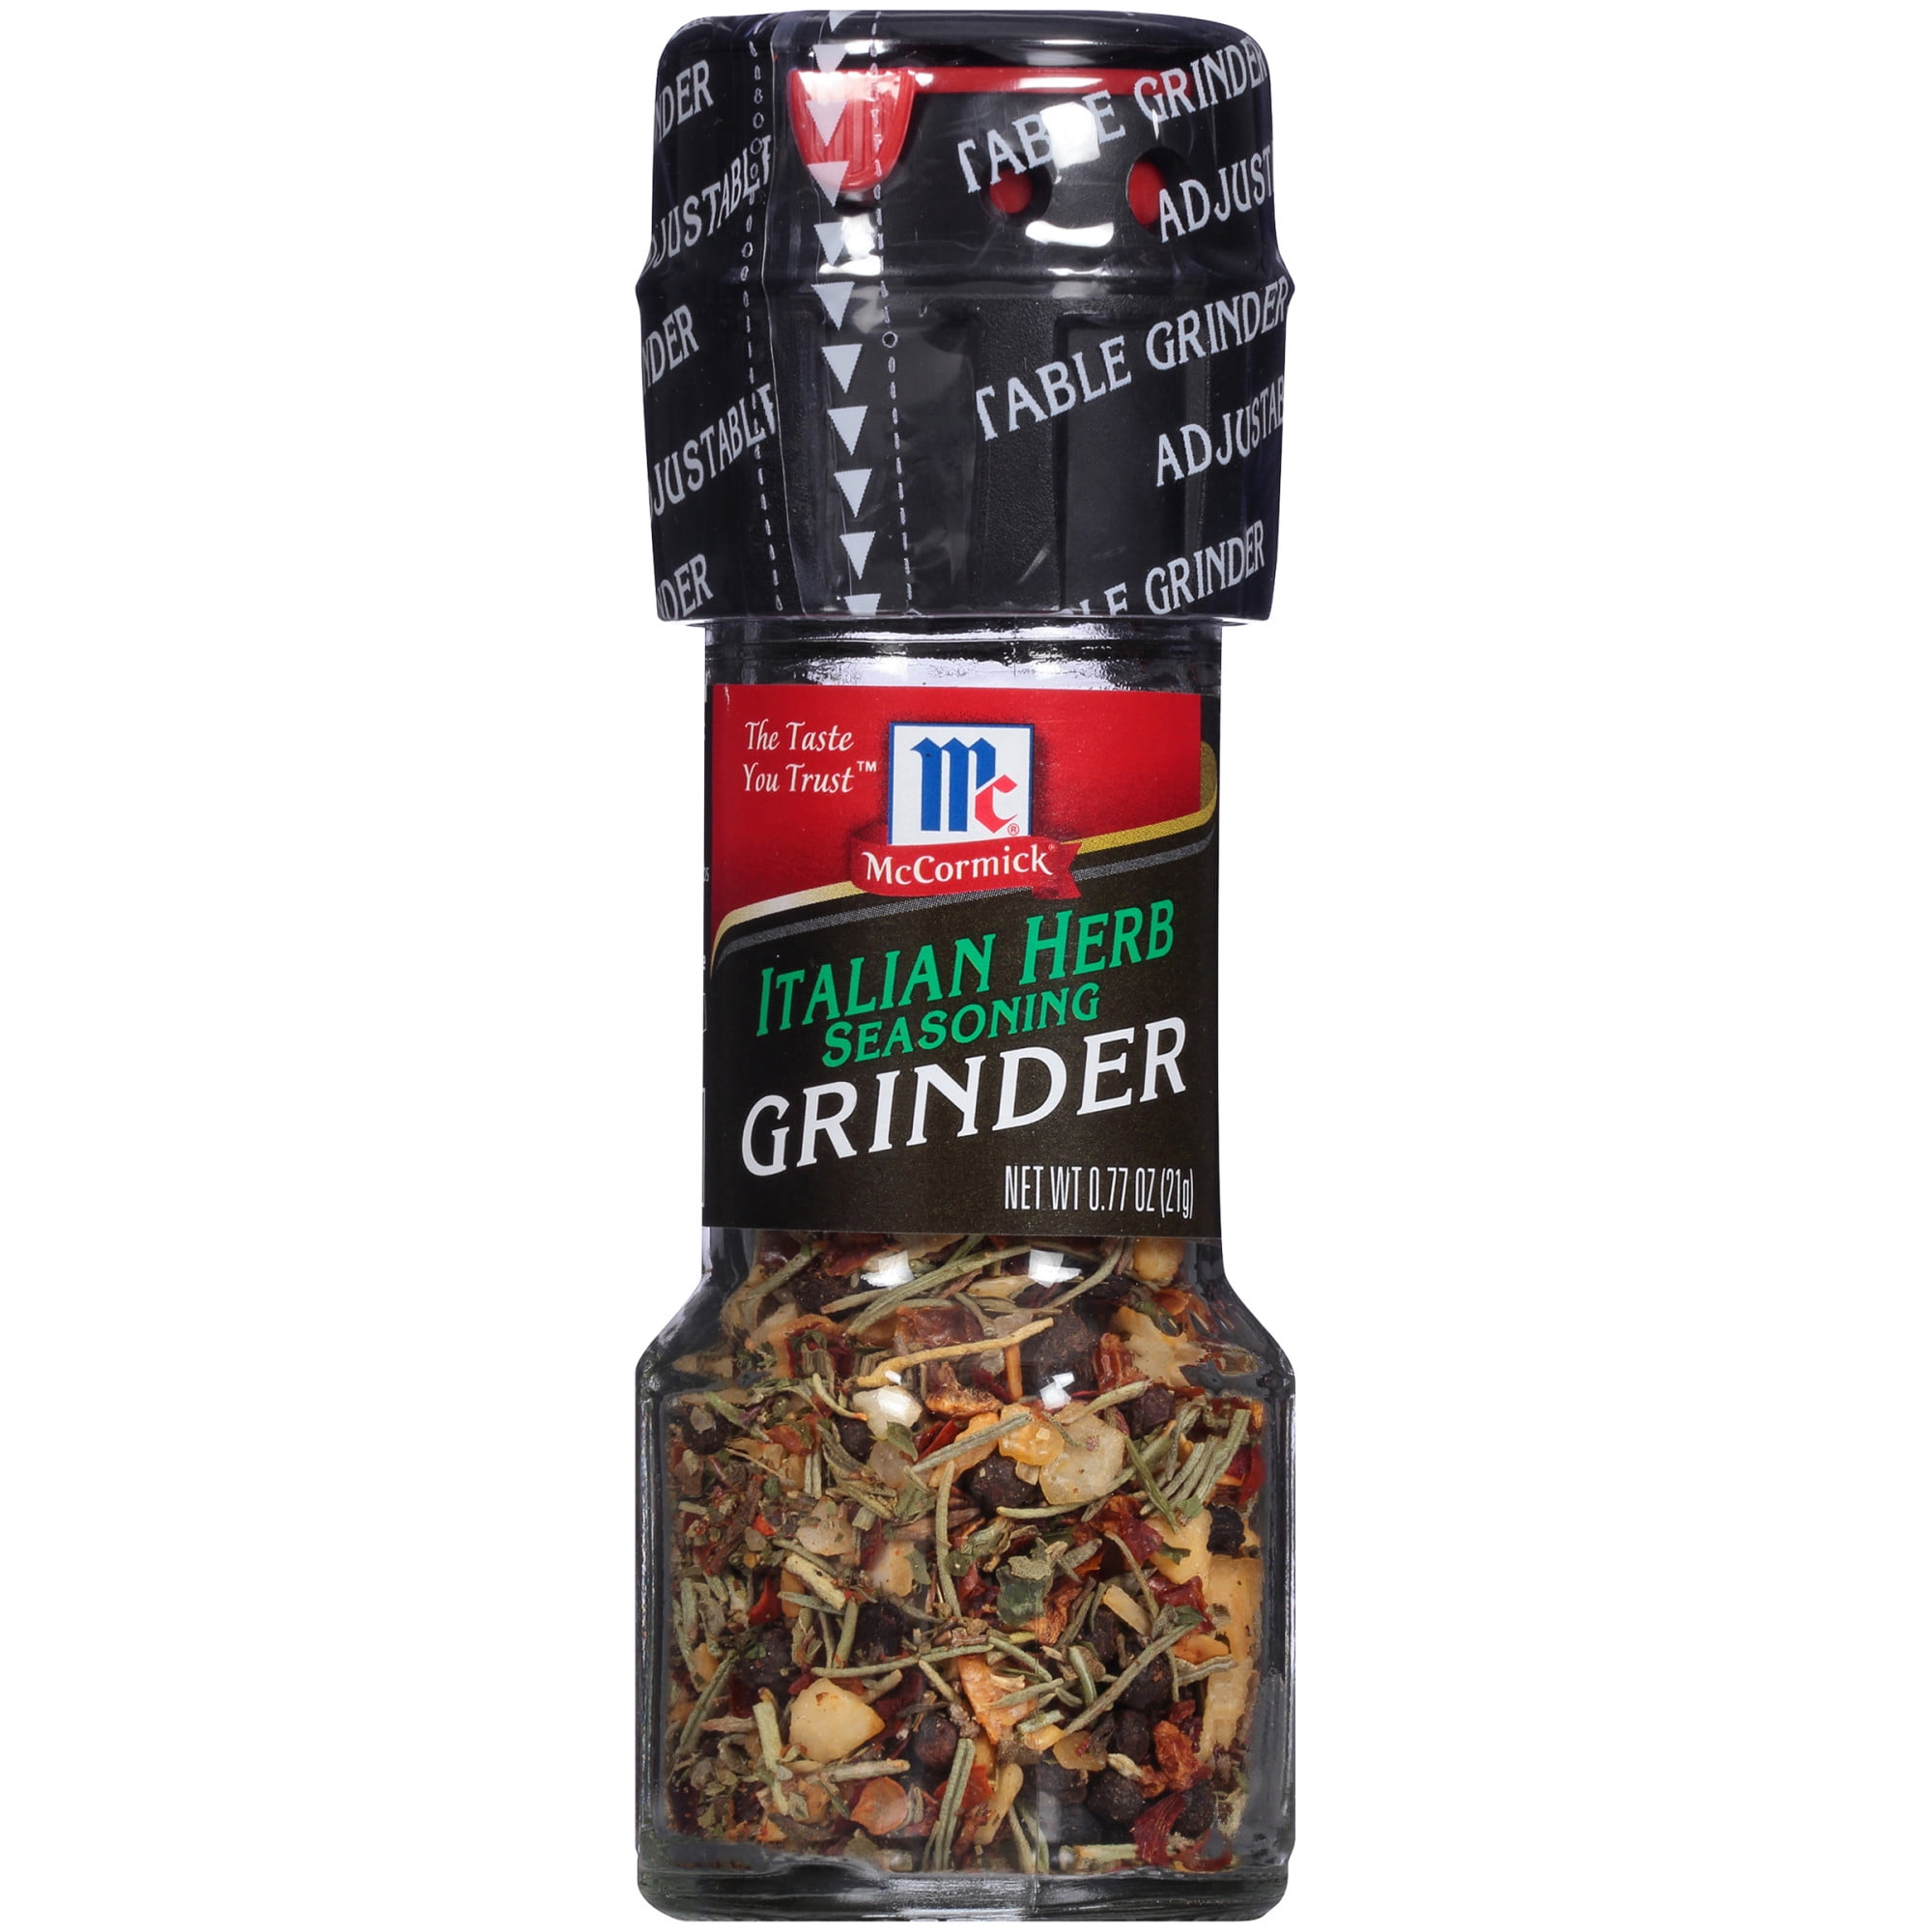 Assorted McCormick Spice Grinder Variety Pack, 6 count, Herb